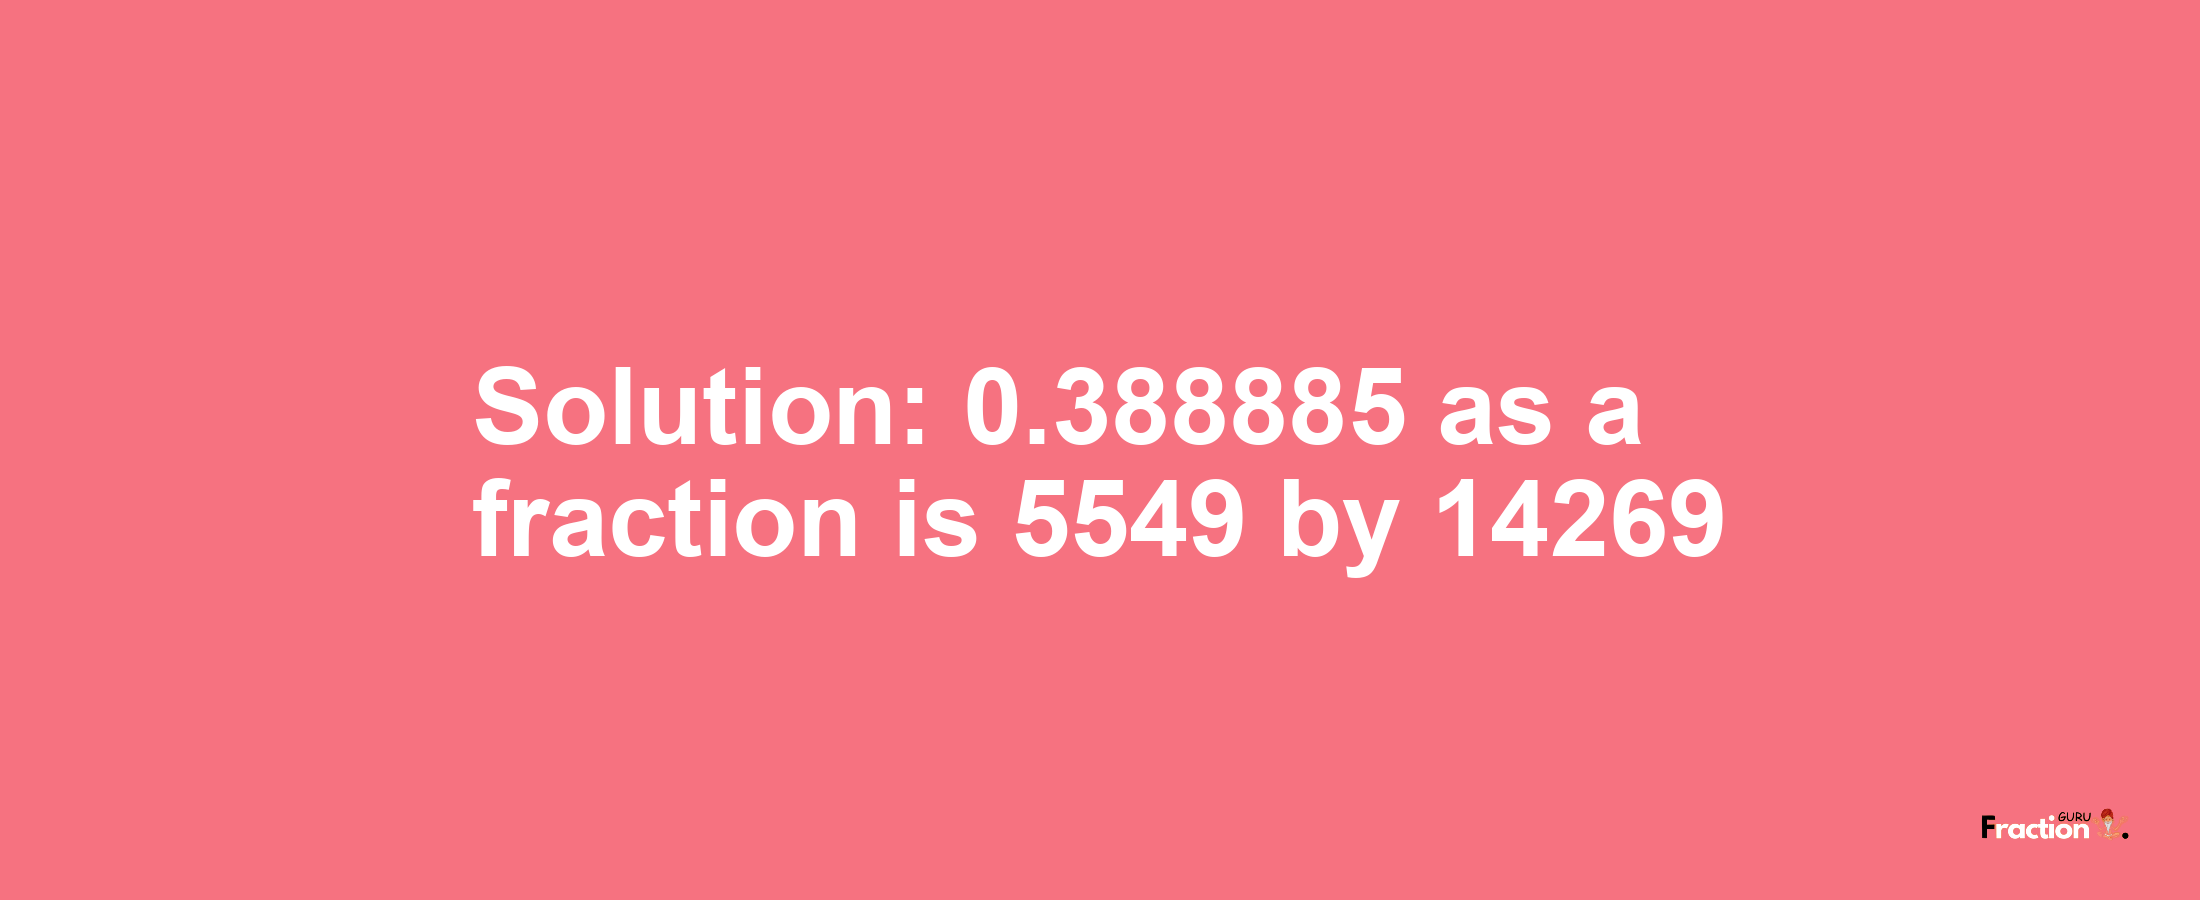 Solution:0.388885 as a fraction is 5549/14269